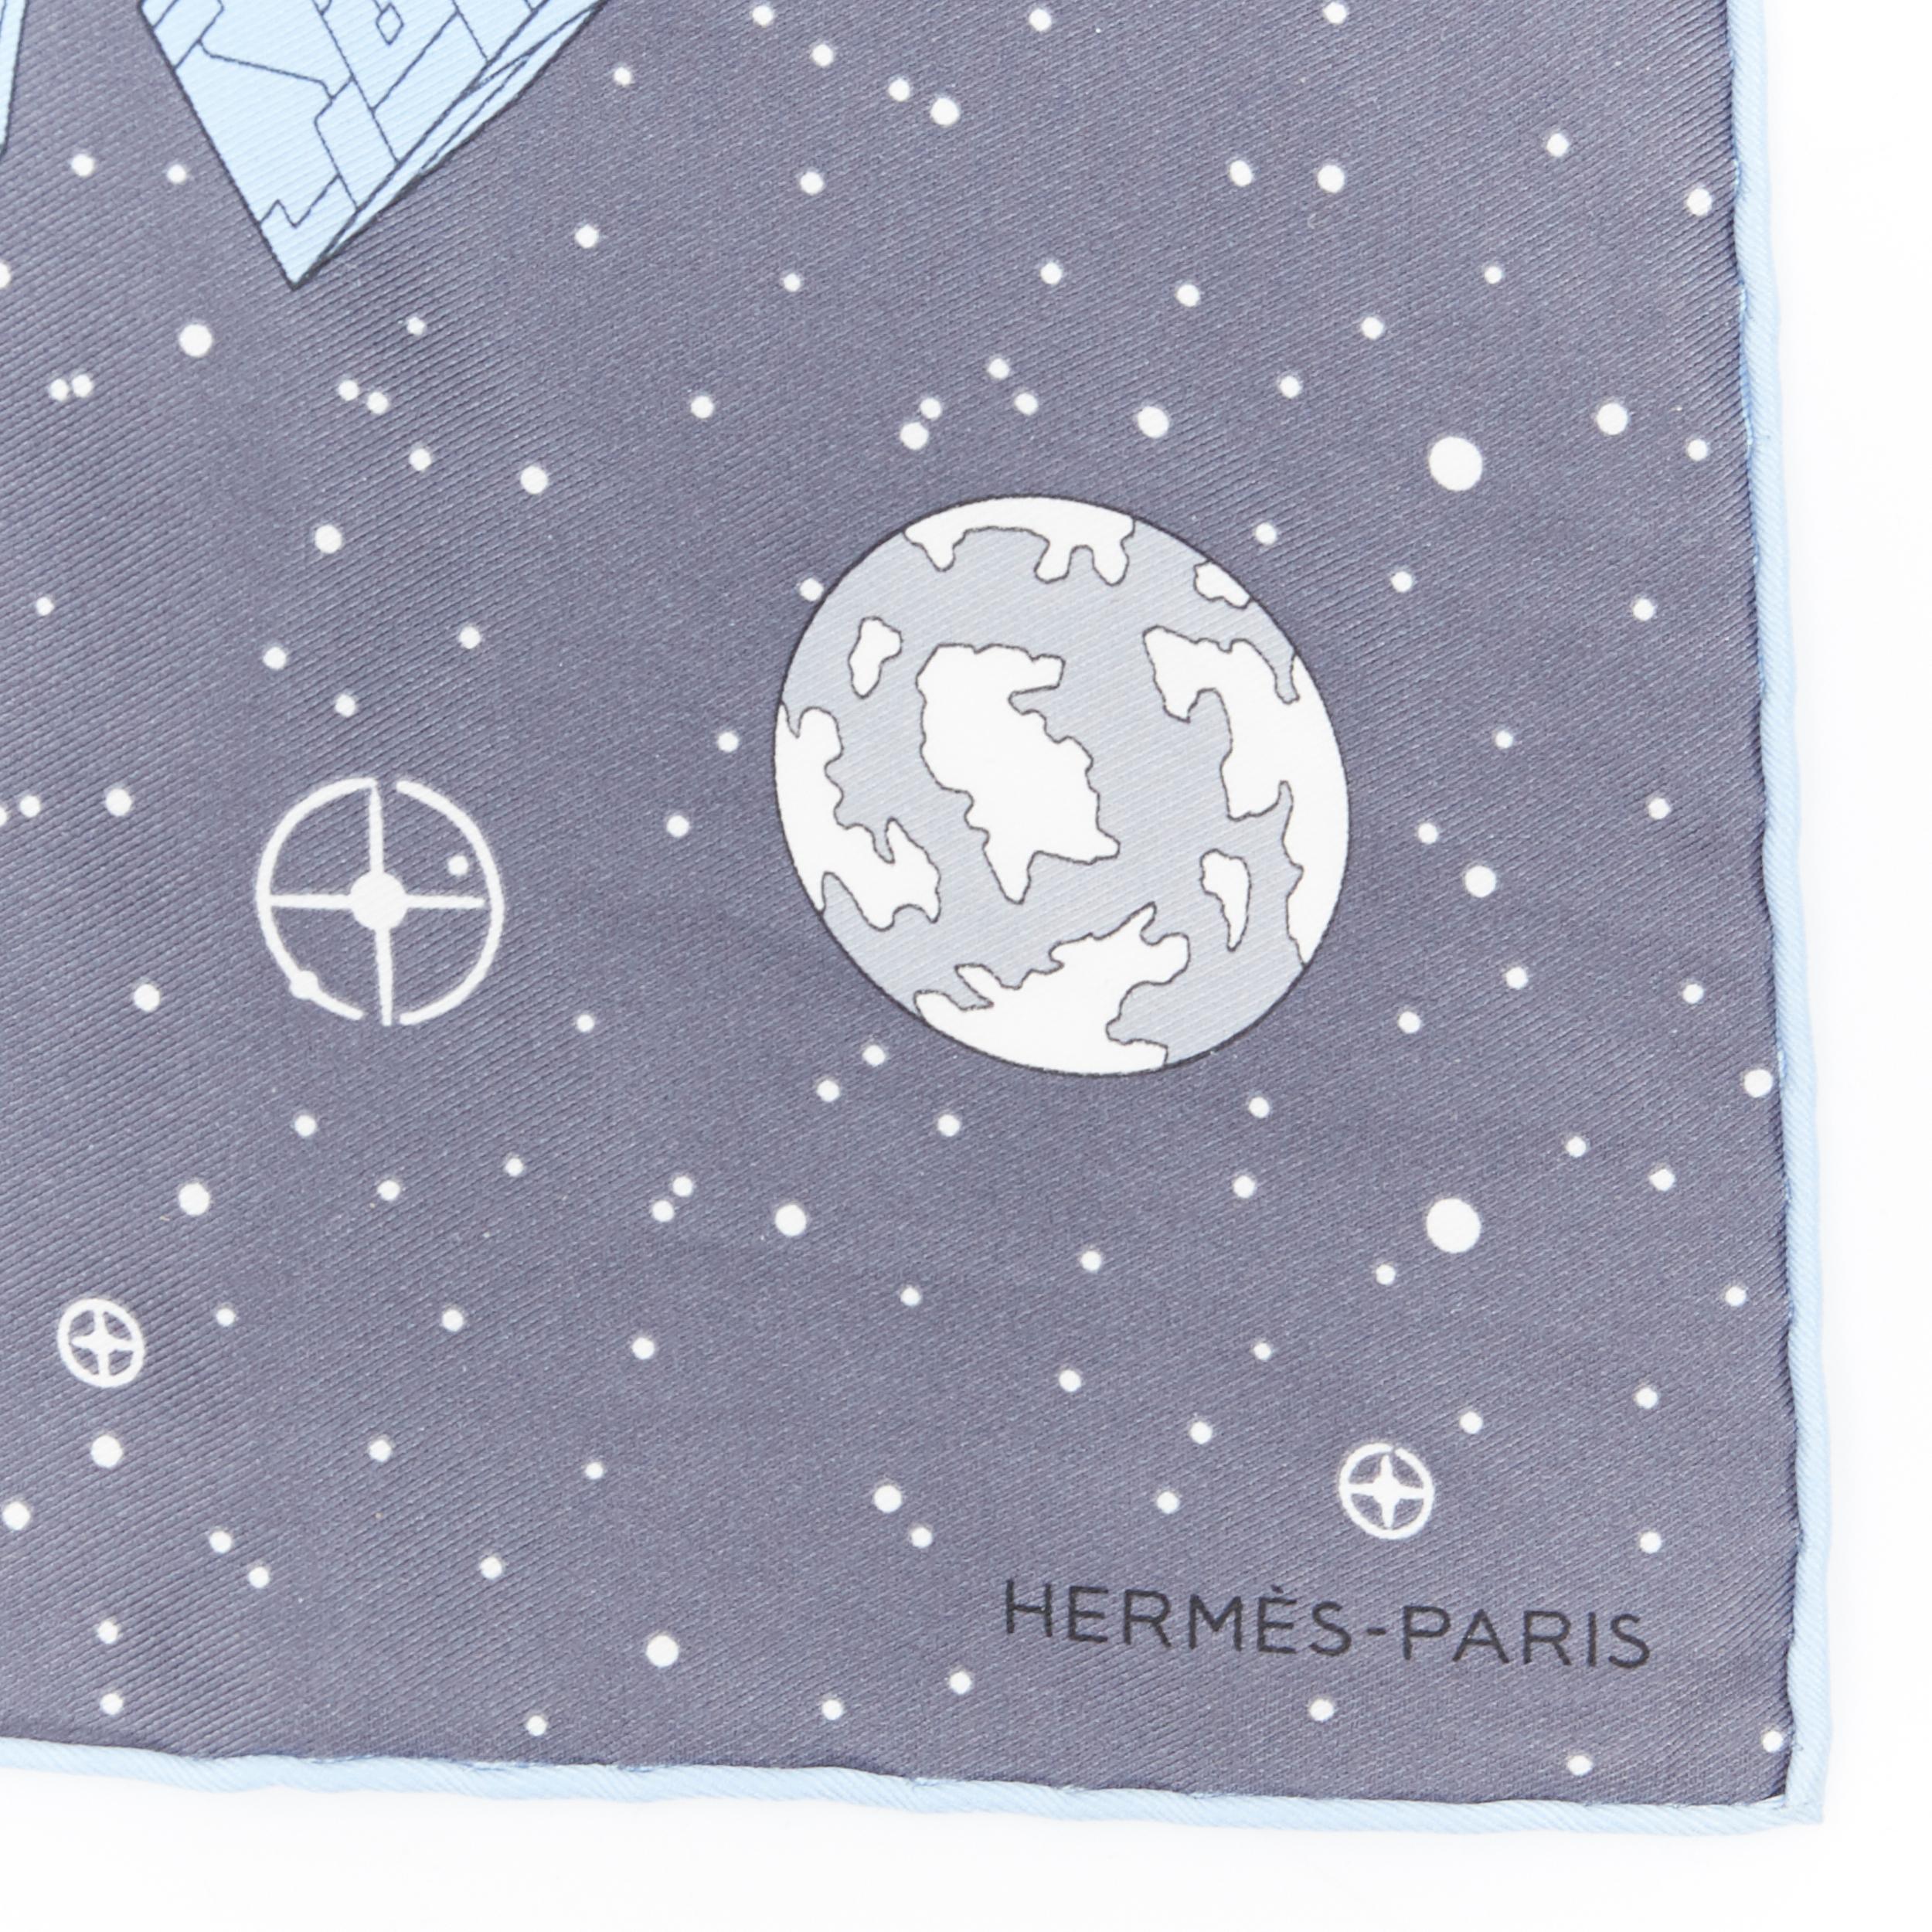 new HERMES 100% silk Odyssey pocket square 45 blue space craft print scarf
Brand: Hermes
Model Name / Style: Silk scarf
Material: Silk
Color: Blue
Pattern: Abstract
Extra Detail: 100% silk. Odyssey Pocket Square 45. Blue space craft print.
Made in: